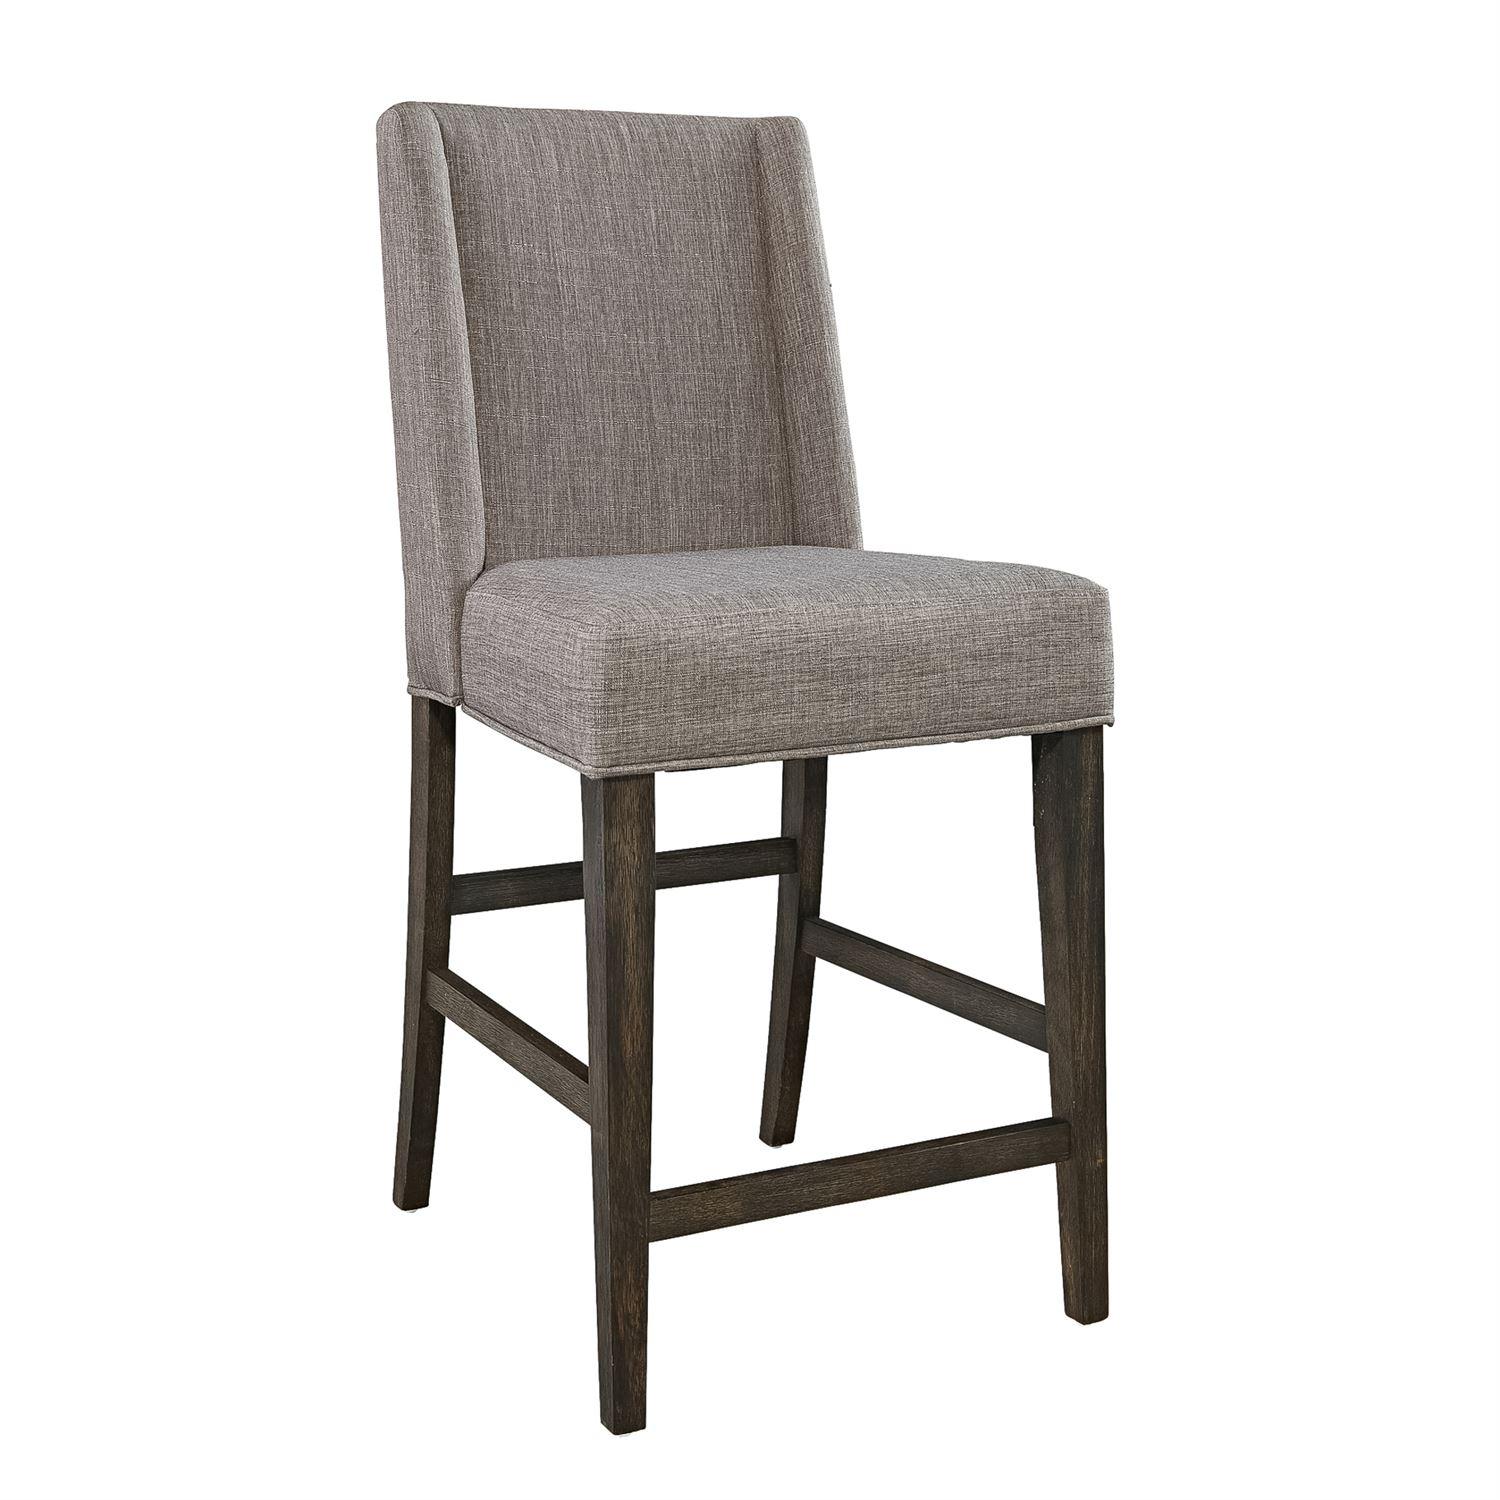 Rustic Counter Chair Double Bridge  (152-CD) Counter Chair 152-B650124-2PC in Chestnut Fabric